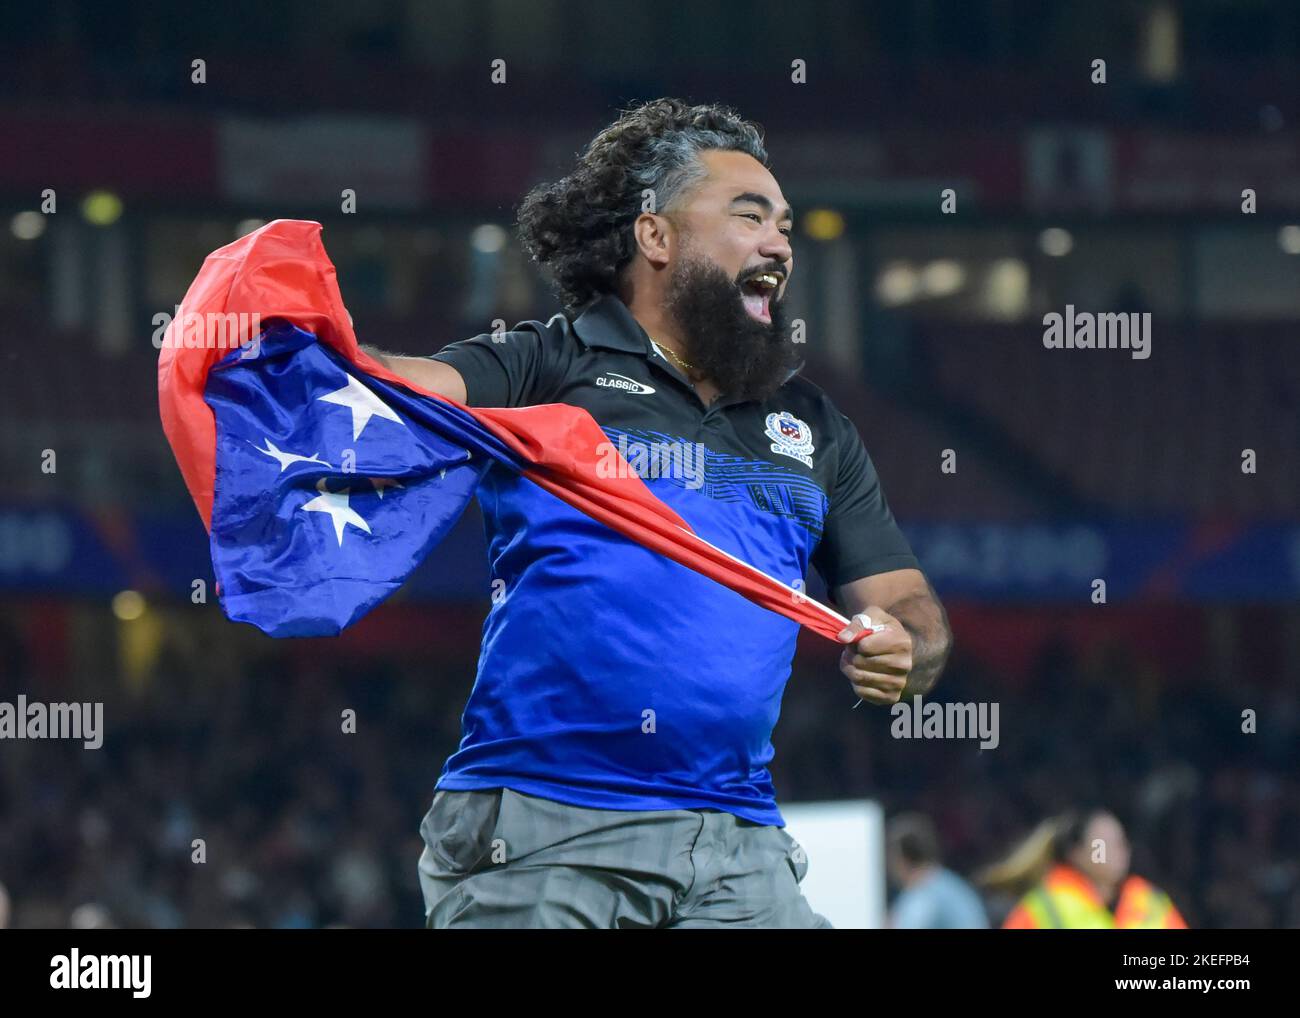 London, UK. 12th Nov 2022. Somoa fan enters the pitch to celebrate   Rugby League World Cup 2021 semi final between England and Samoa at The Emirates, Arsenal, London, UK on November 12 2022   (Photo by Craig Cresswell/Alamy Live News) Stock Photo